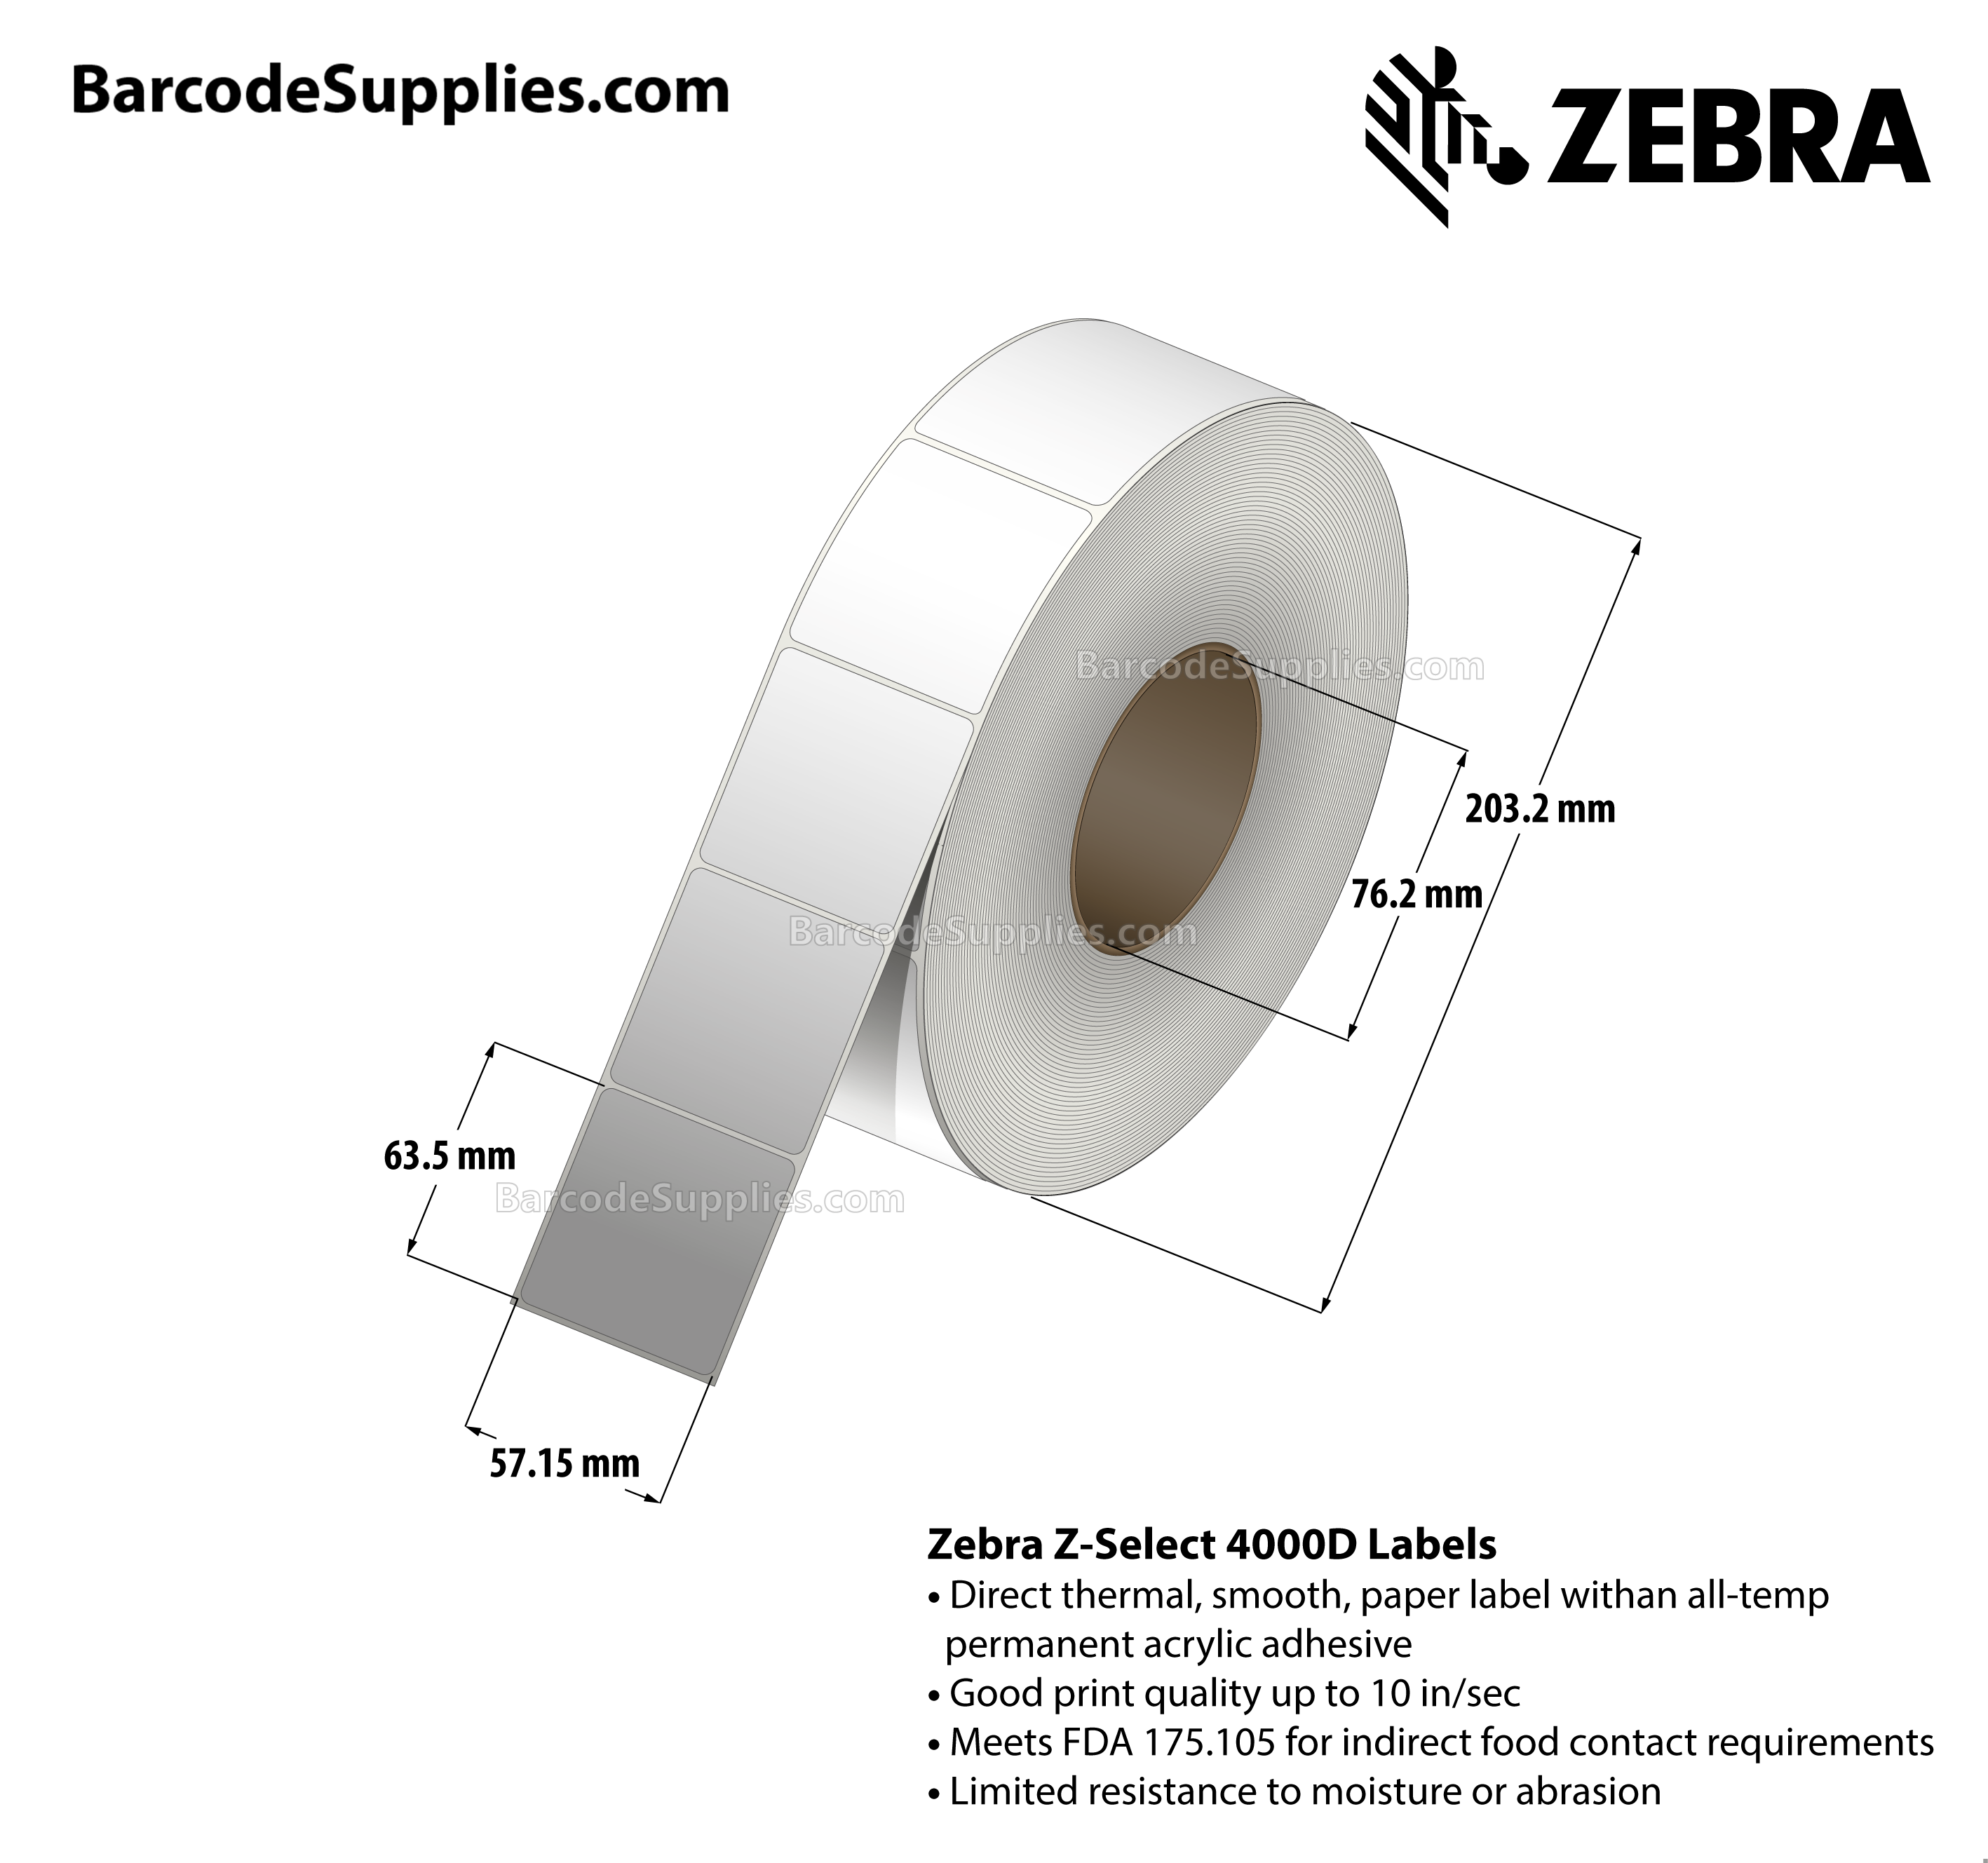 2.25 x 2.5 Direct Thermal White Z-Select 4000D Labels With All-Temp Adhesive - Not Perforated - 1980 Labels Per Roll - Carton Of 8 Rolls - 15840 Labels Total - MPN: 72277